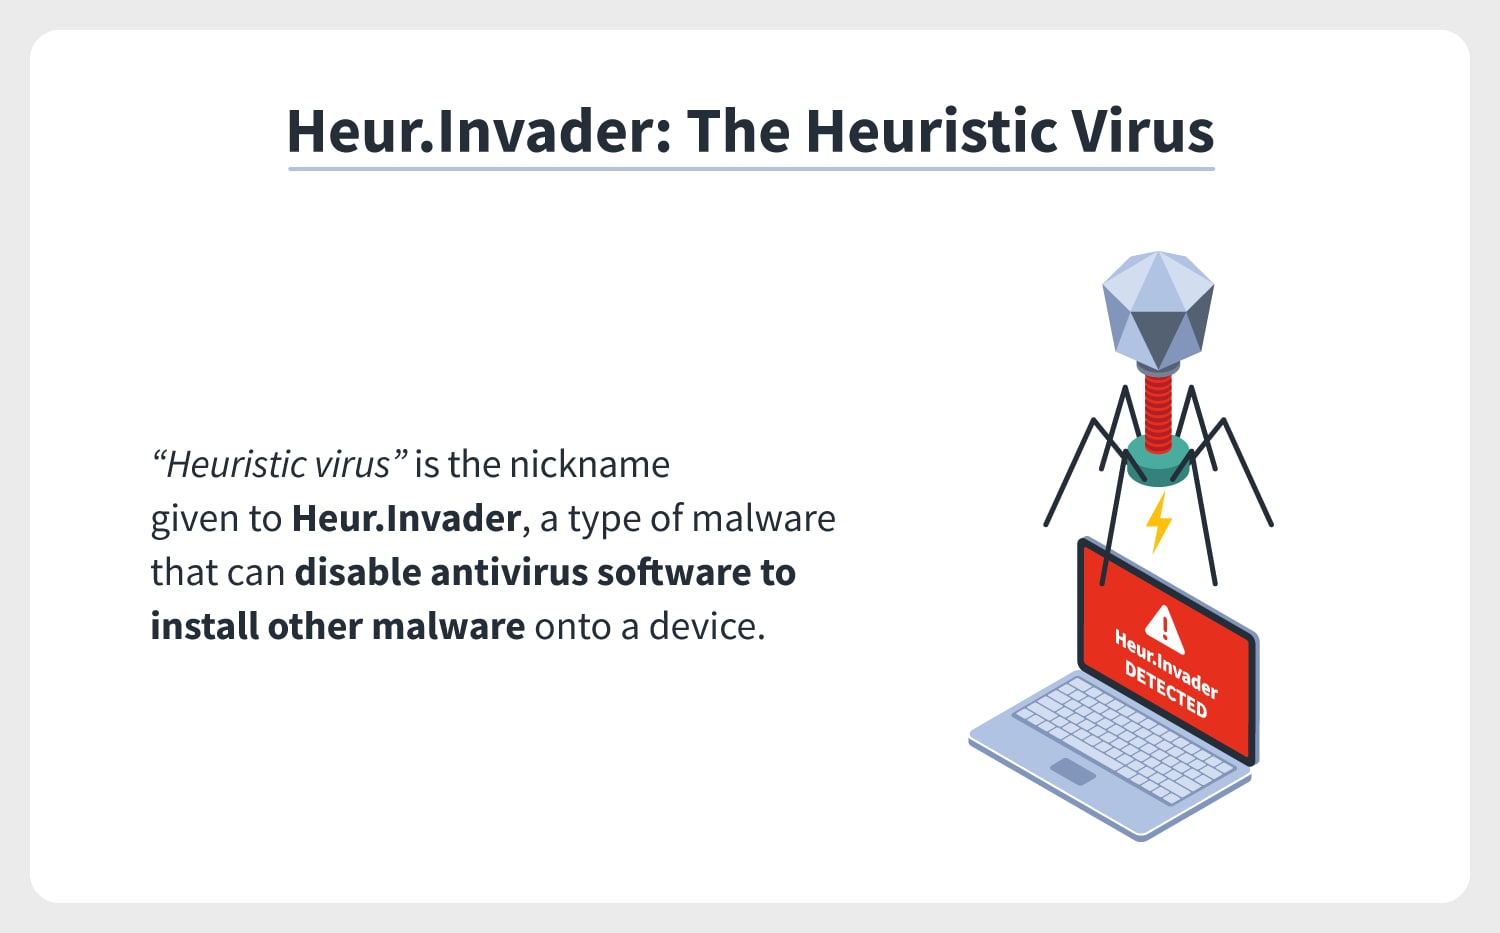 Allow the antivirus software to scan the file for malware
If malware is detected, follow the antivirus software's instructions to remove it